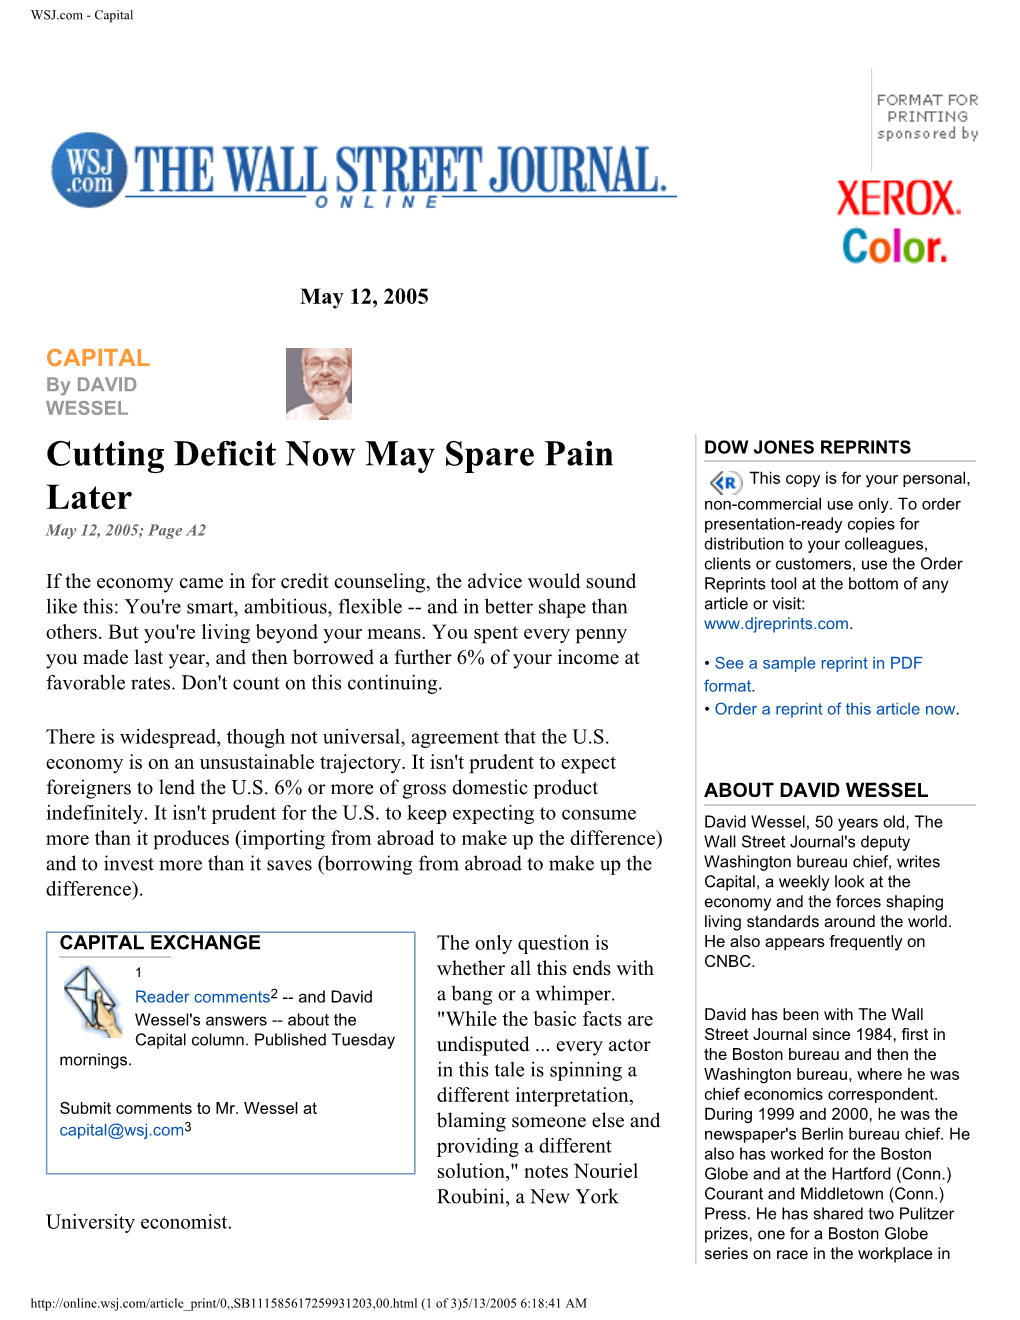 Cutting Deficit Now May Spare Pain Later